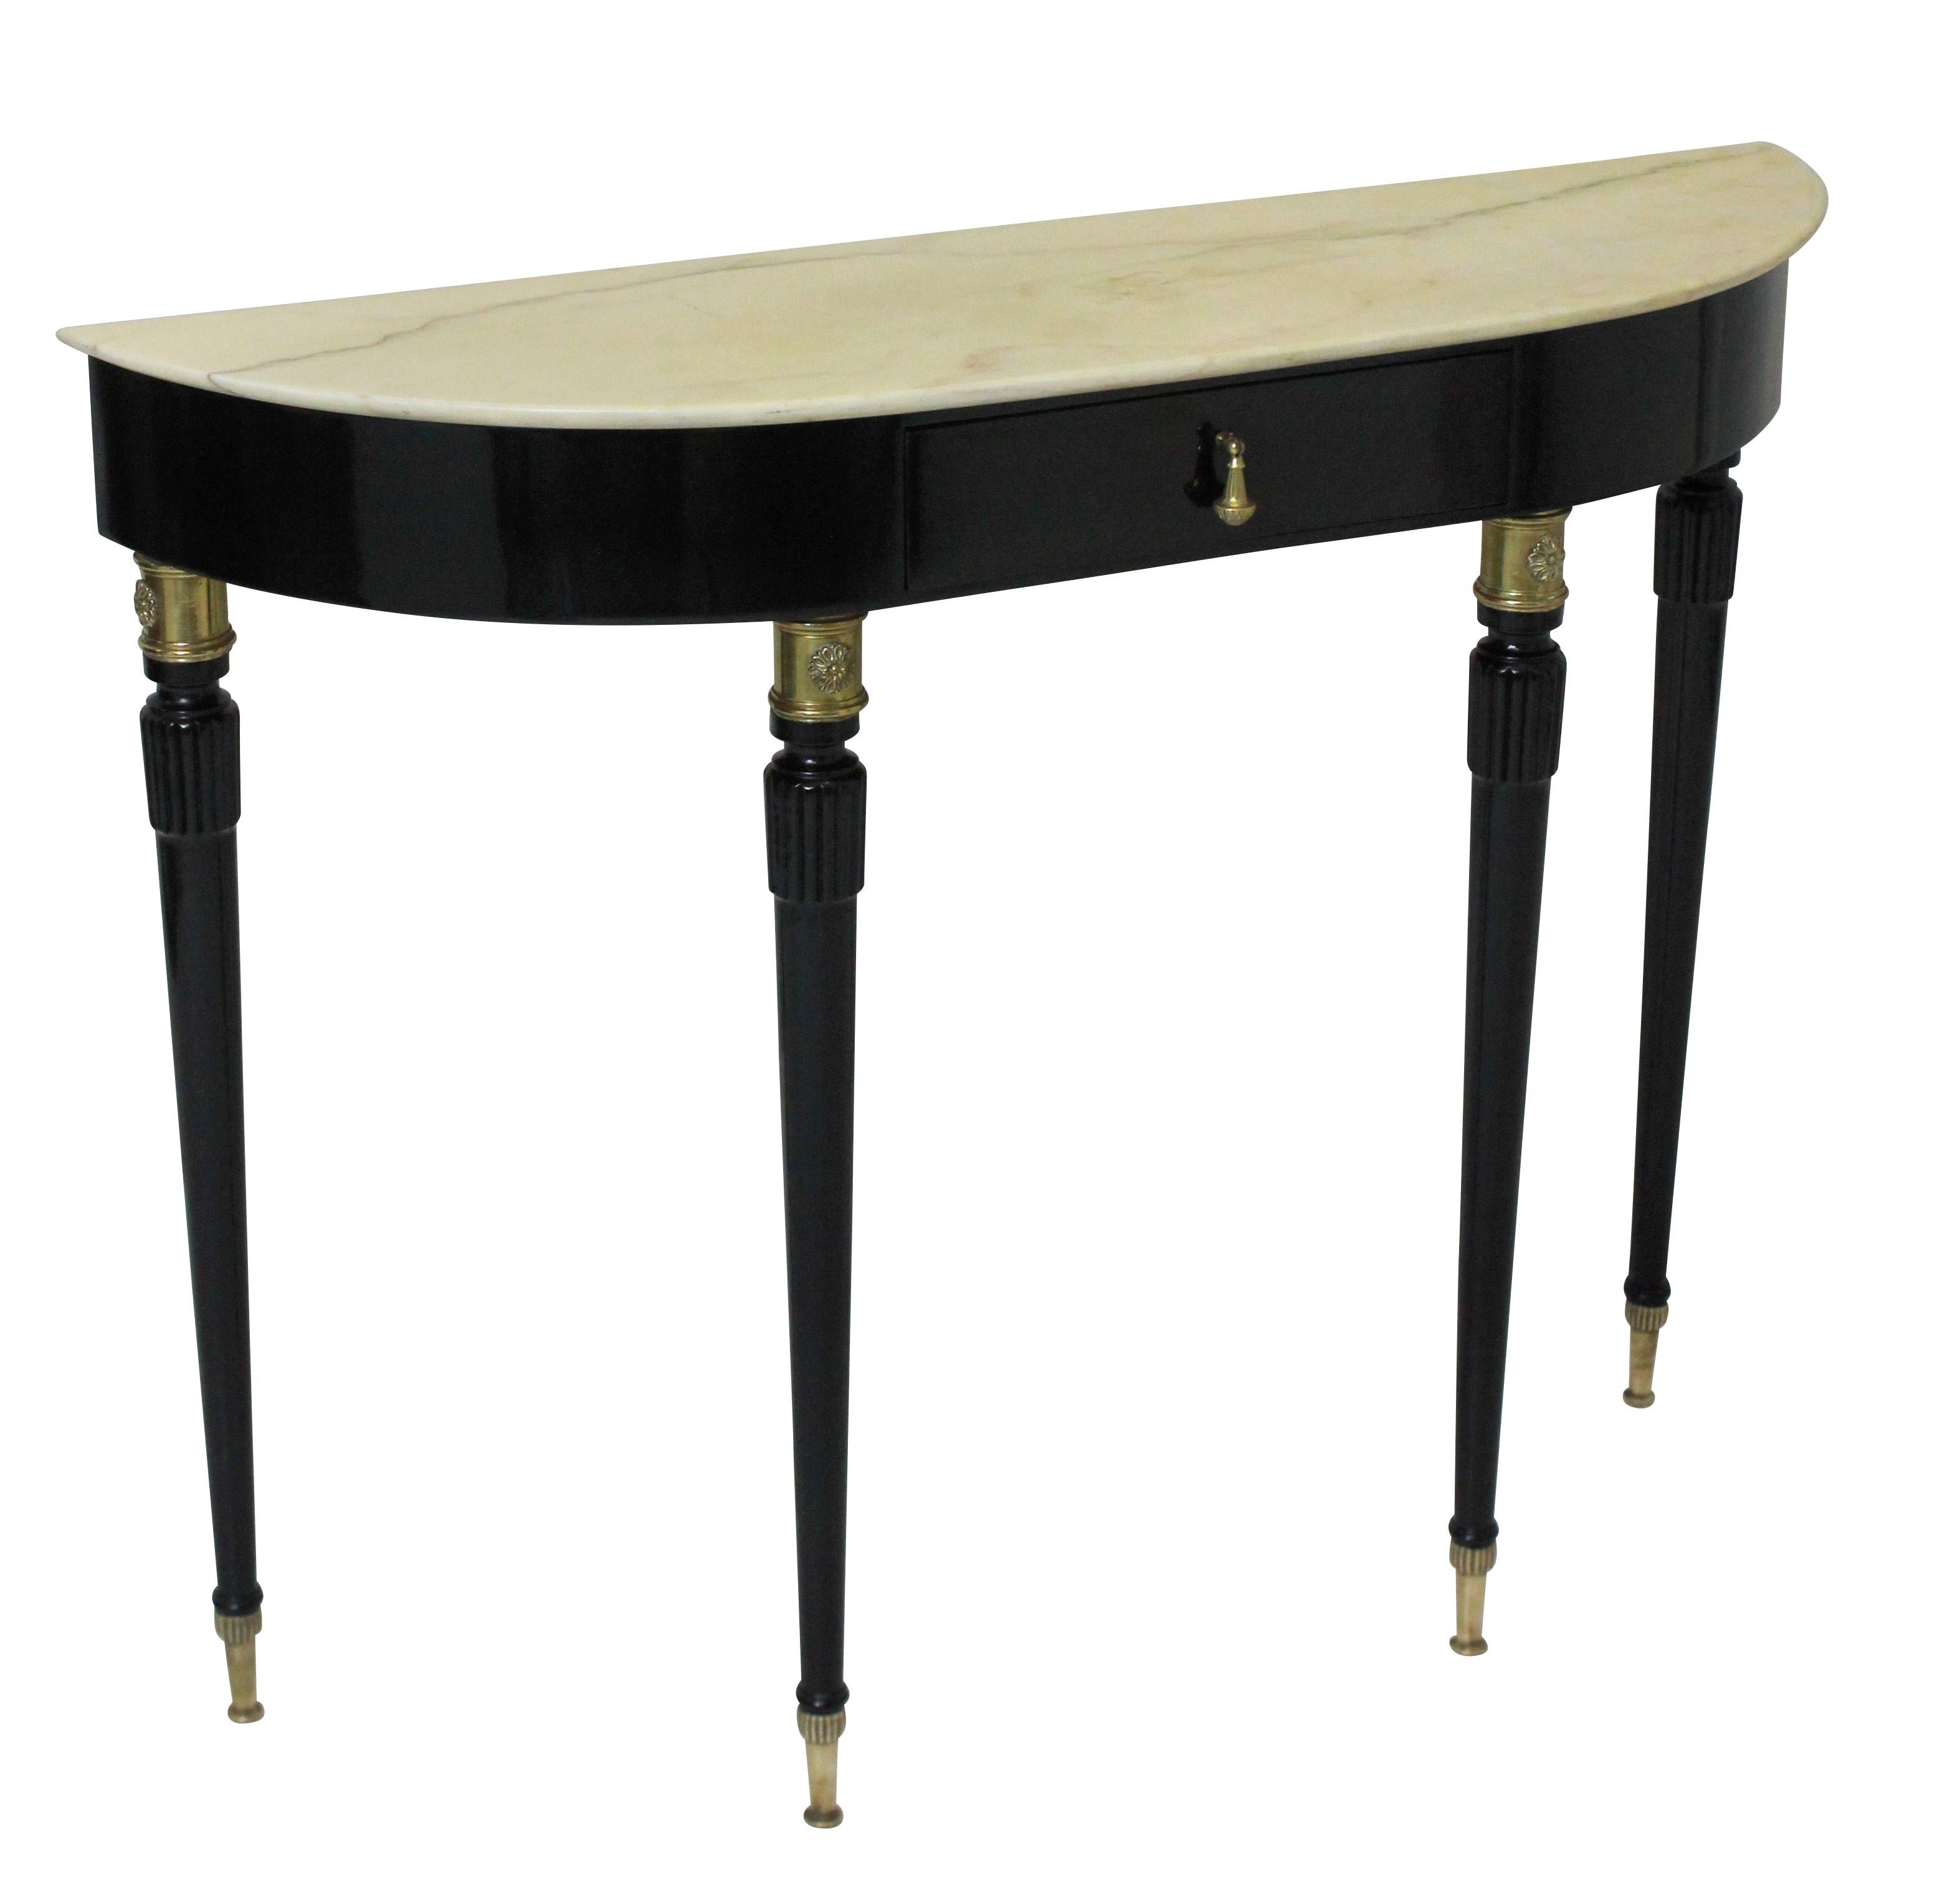 A fine Italian midcentury demilune console in black lacquer. With good brass sabot feet and detailing, a central drawer and cream marble top.

  